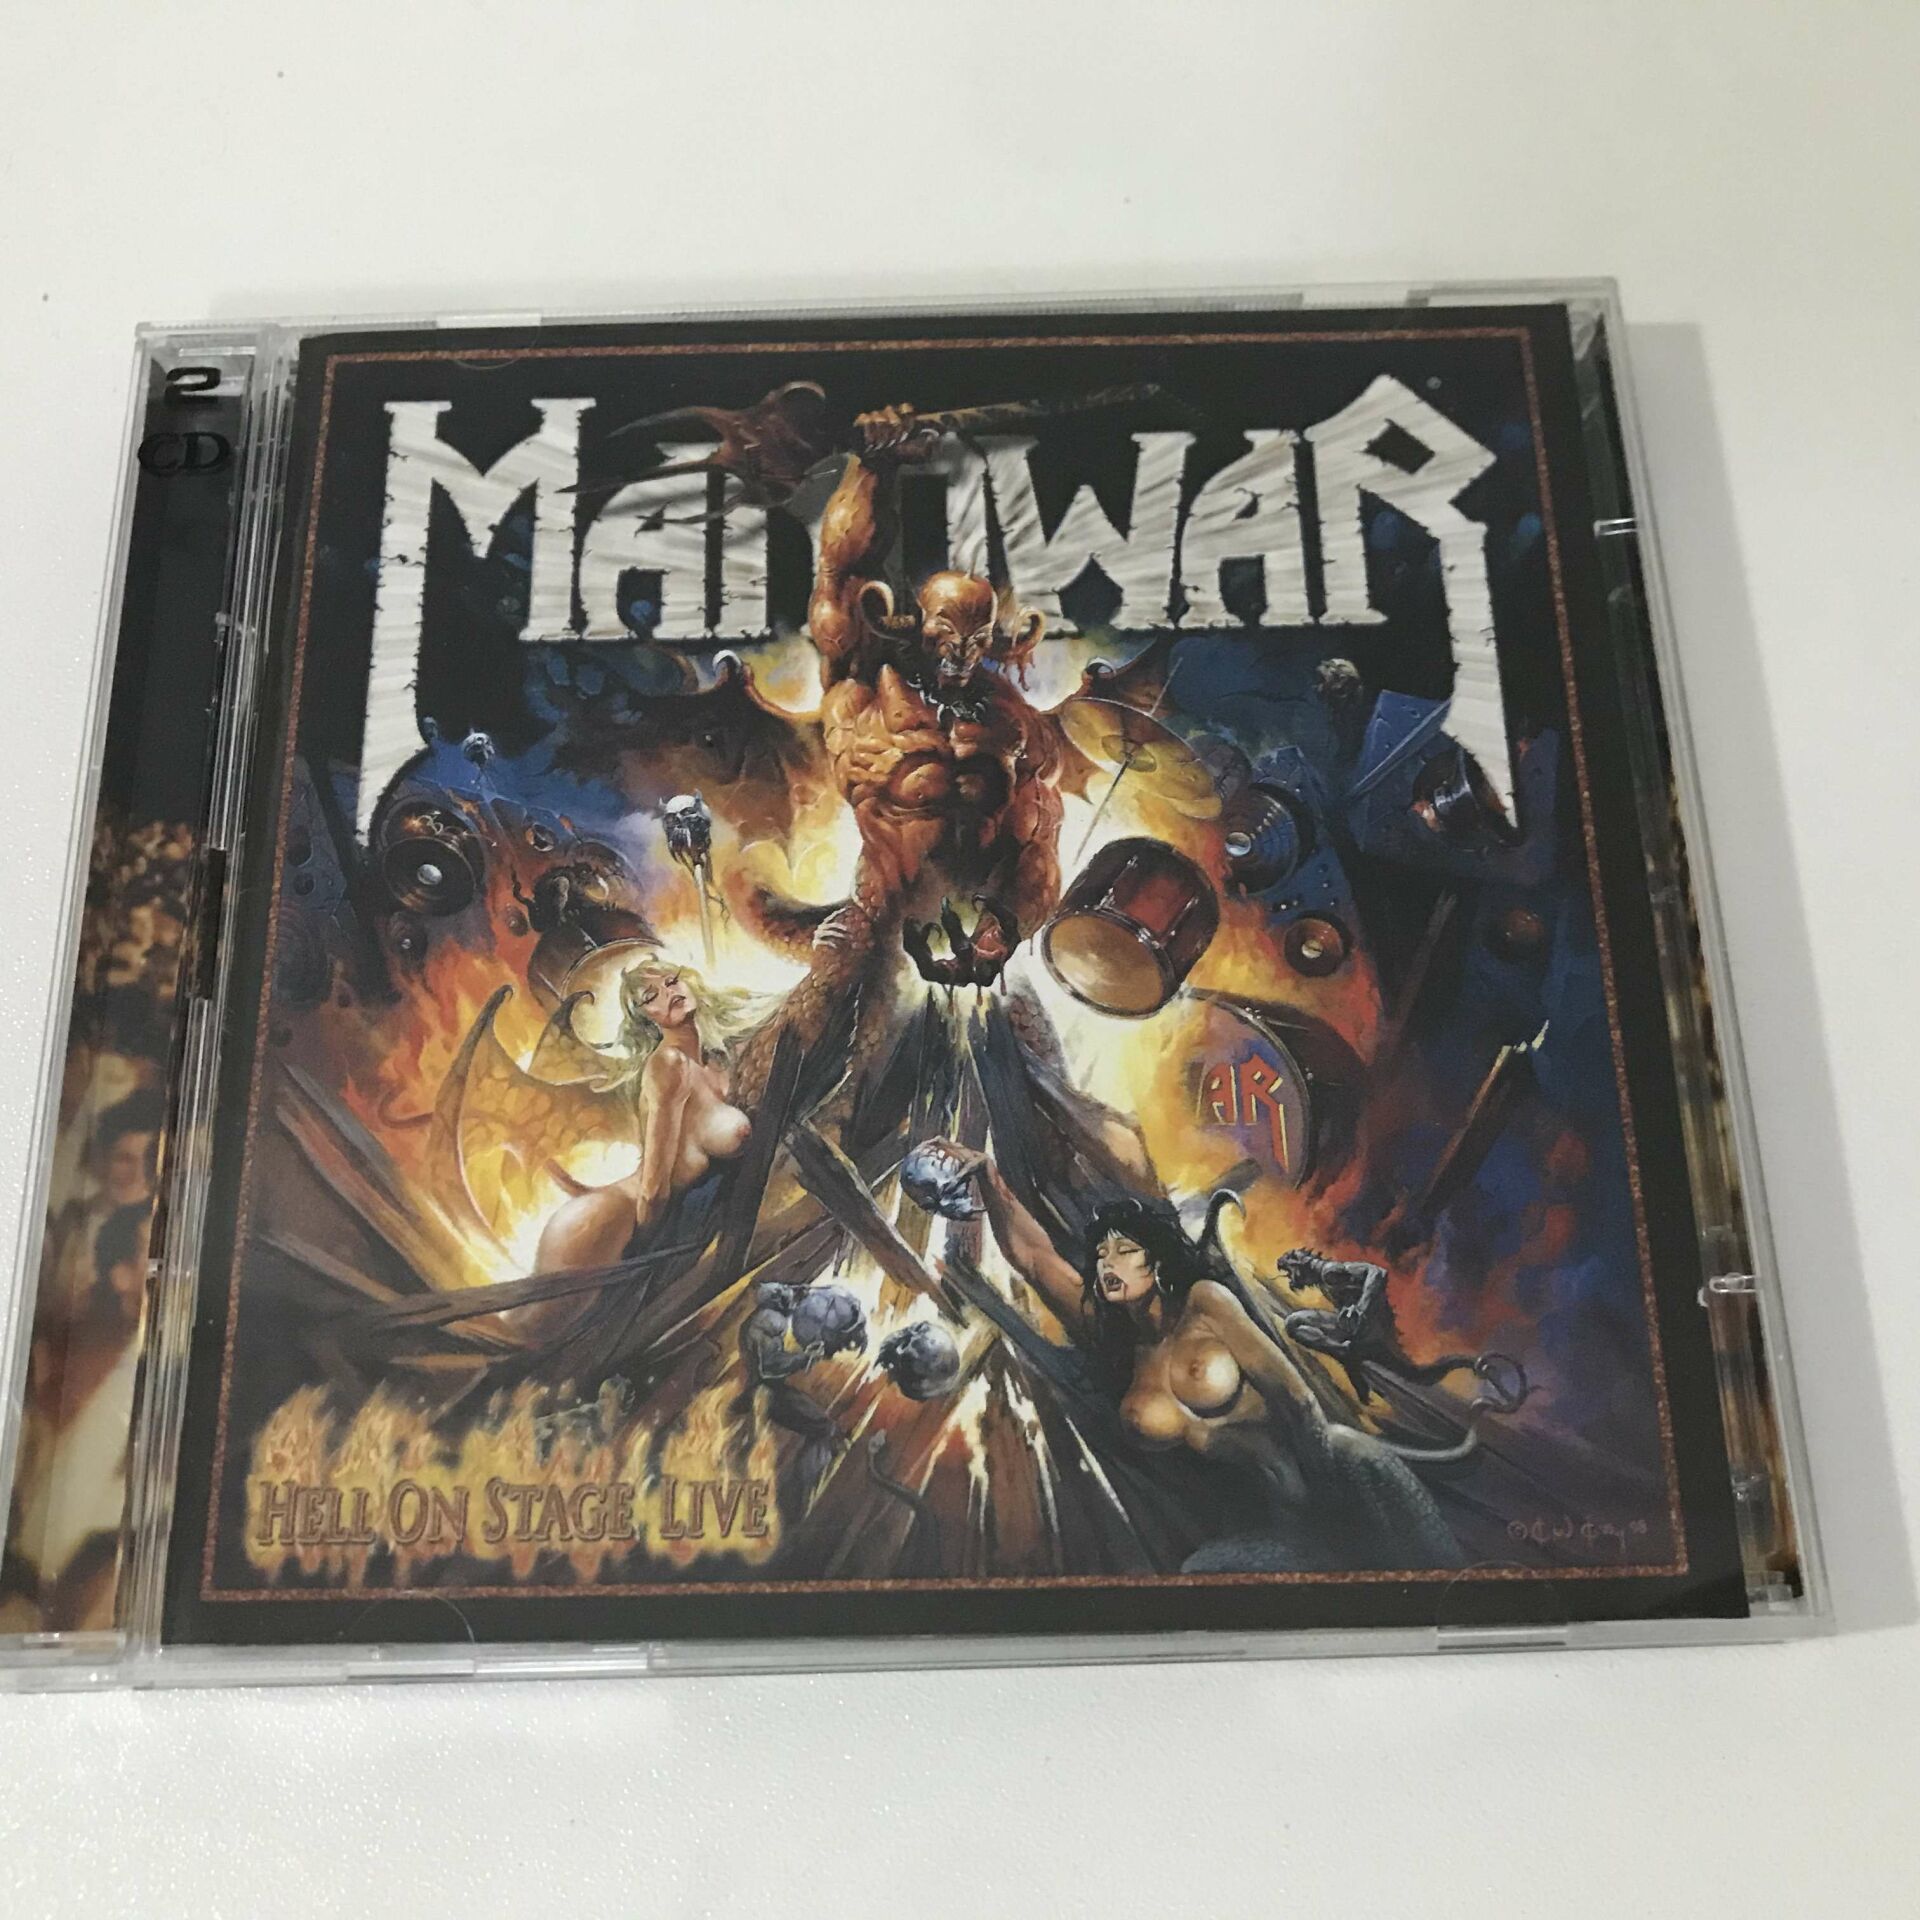 Manowar – Hell On Stage Live 2 CD